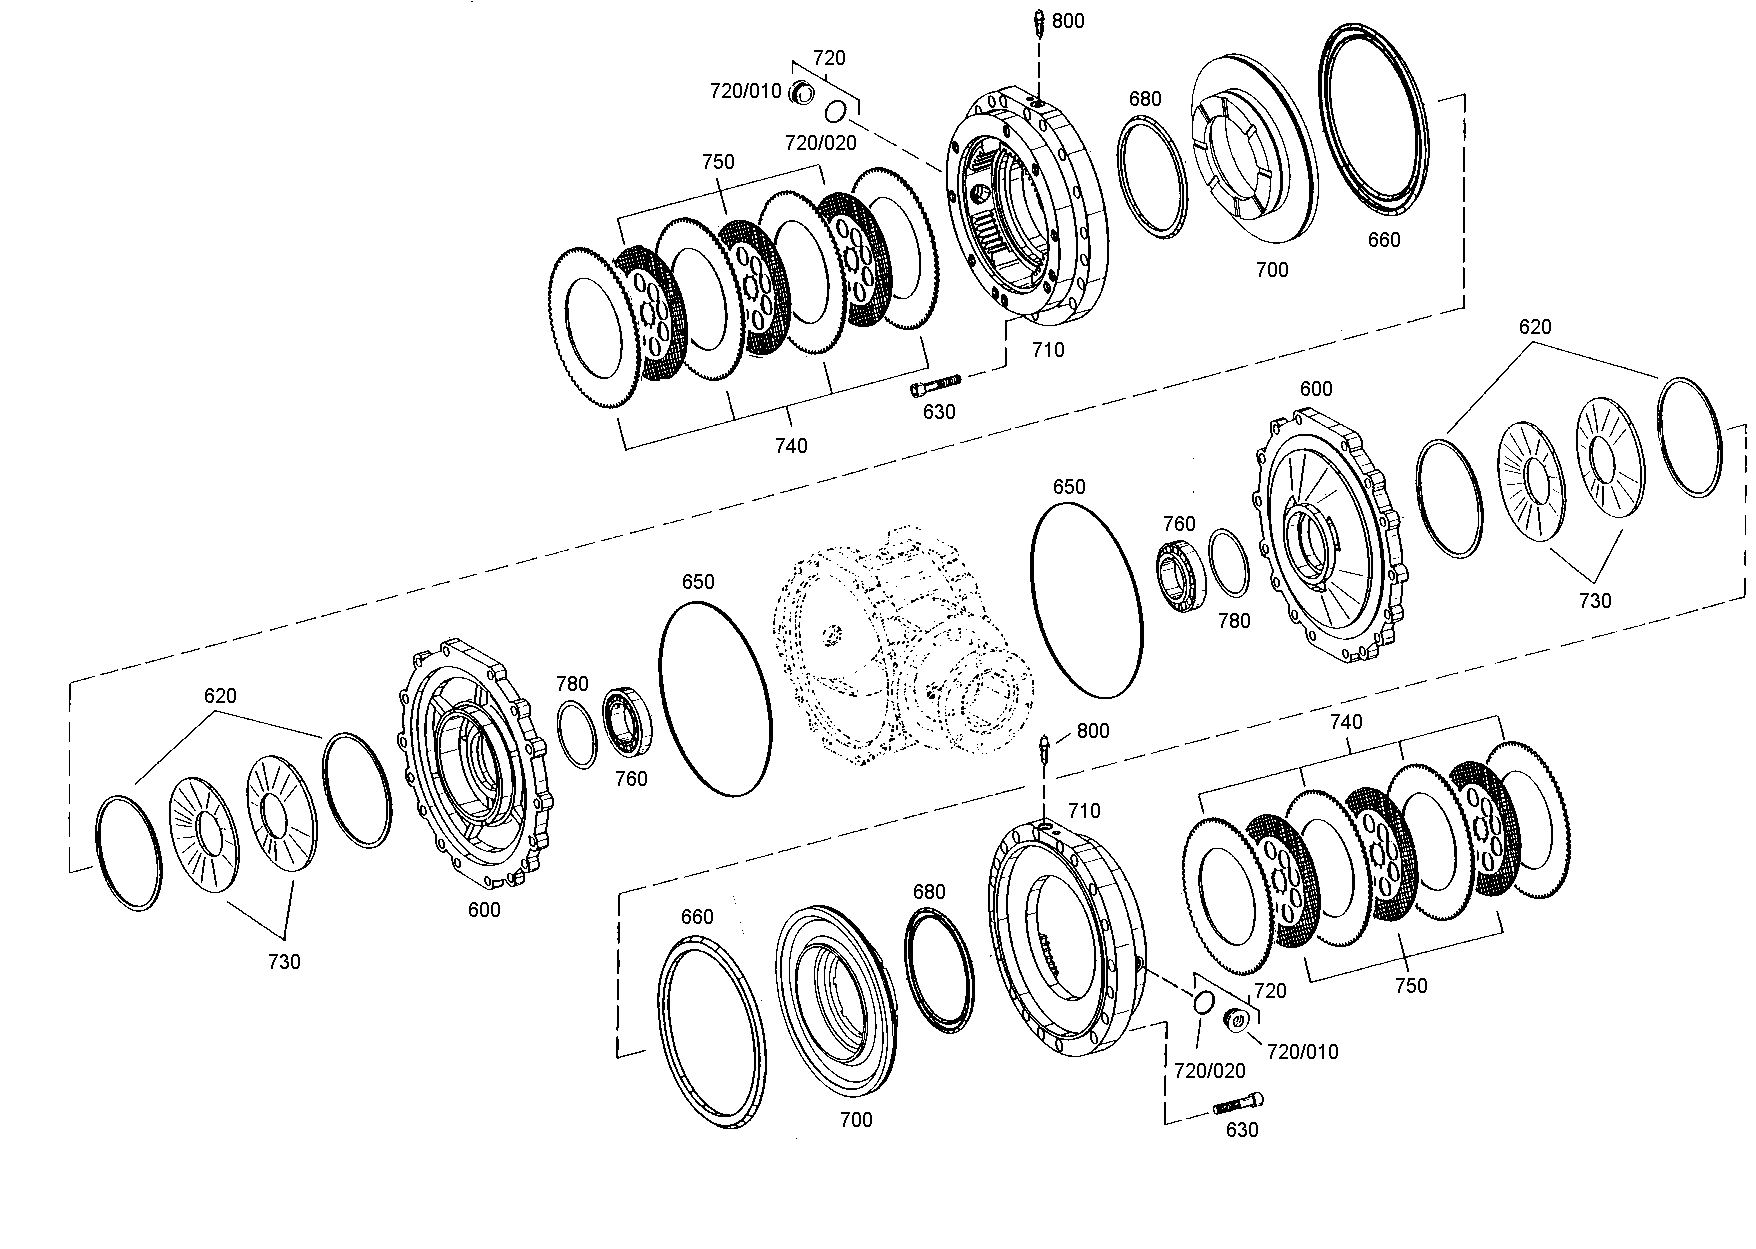 drawing for HAMM AG 1282093 - WASHER (figure 4)